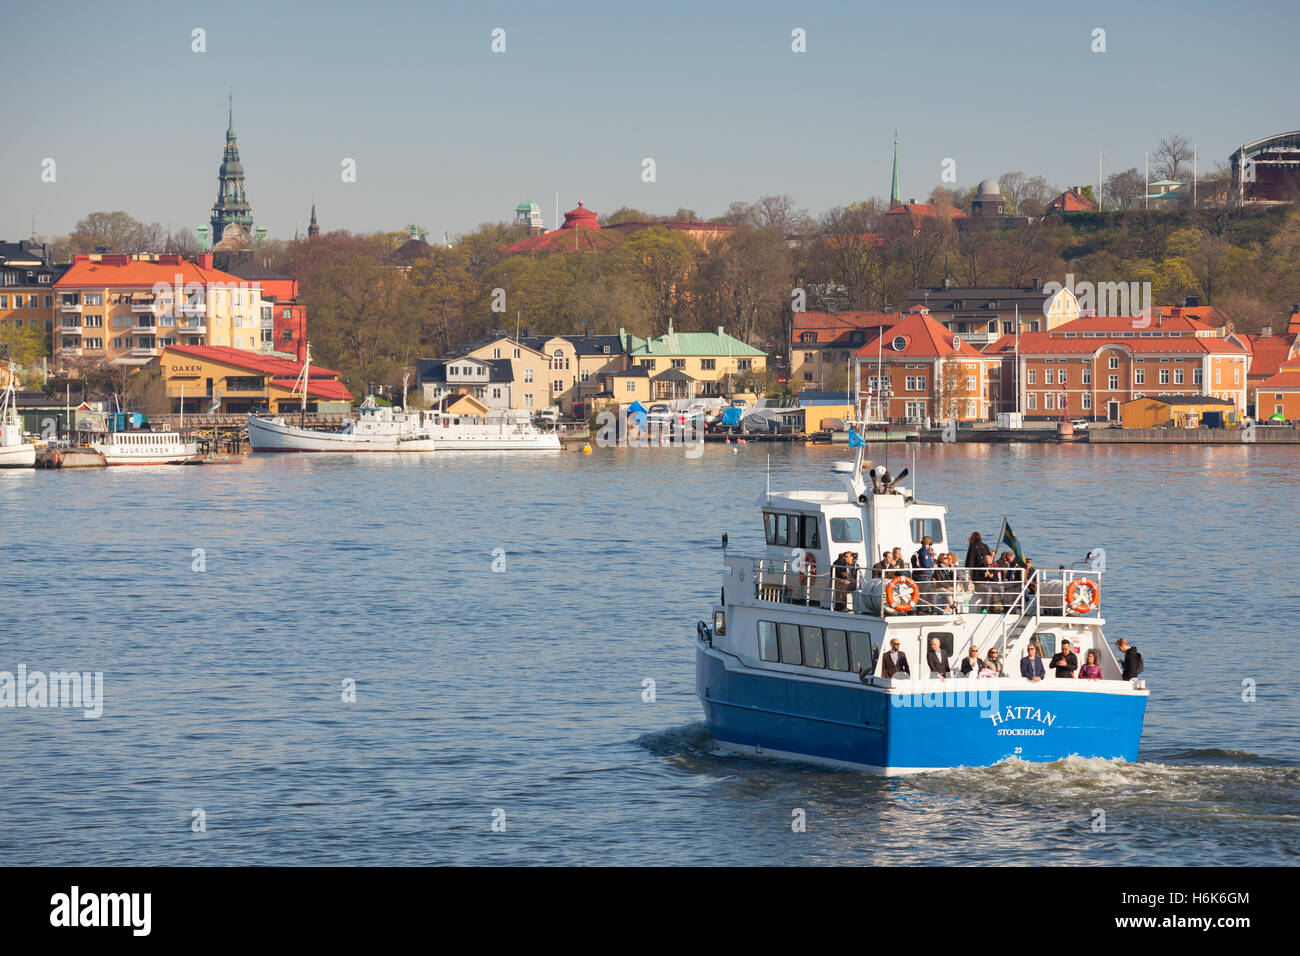 Stockholm, Sweden - May 4, 2016: Small blue passenger ferry Hattan with ordinary people on board, regular public transportation Stock Photo